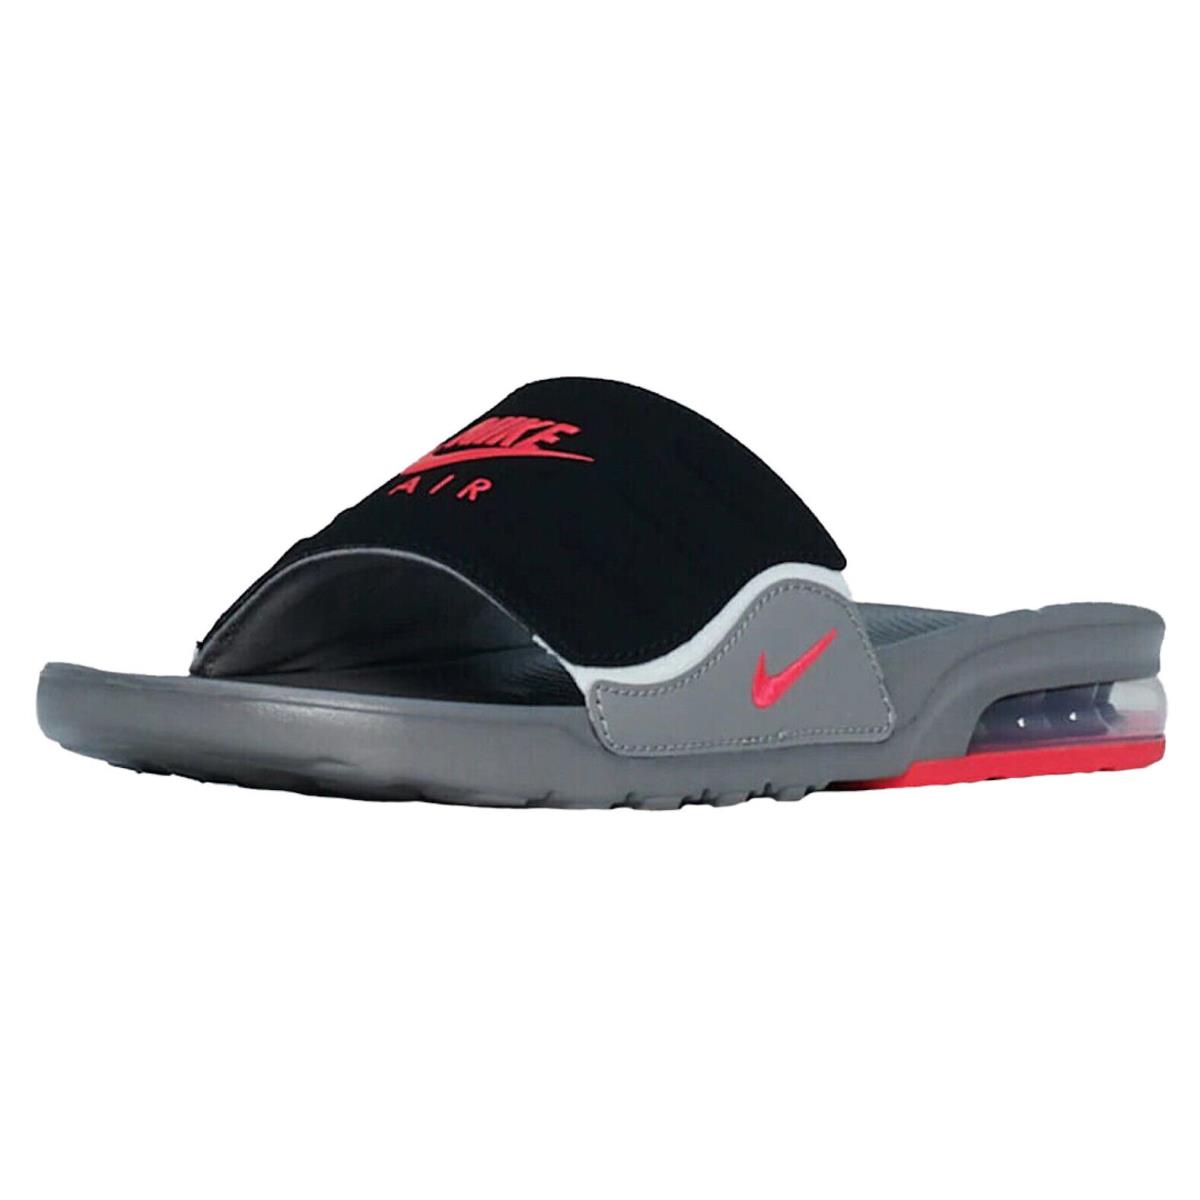 Nike Youth Air Max Camden Slide Sandals sz 6Y Gray Black Infrared Swoosh - Gray